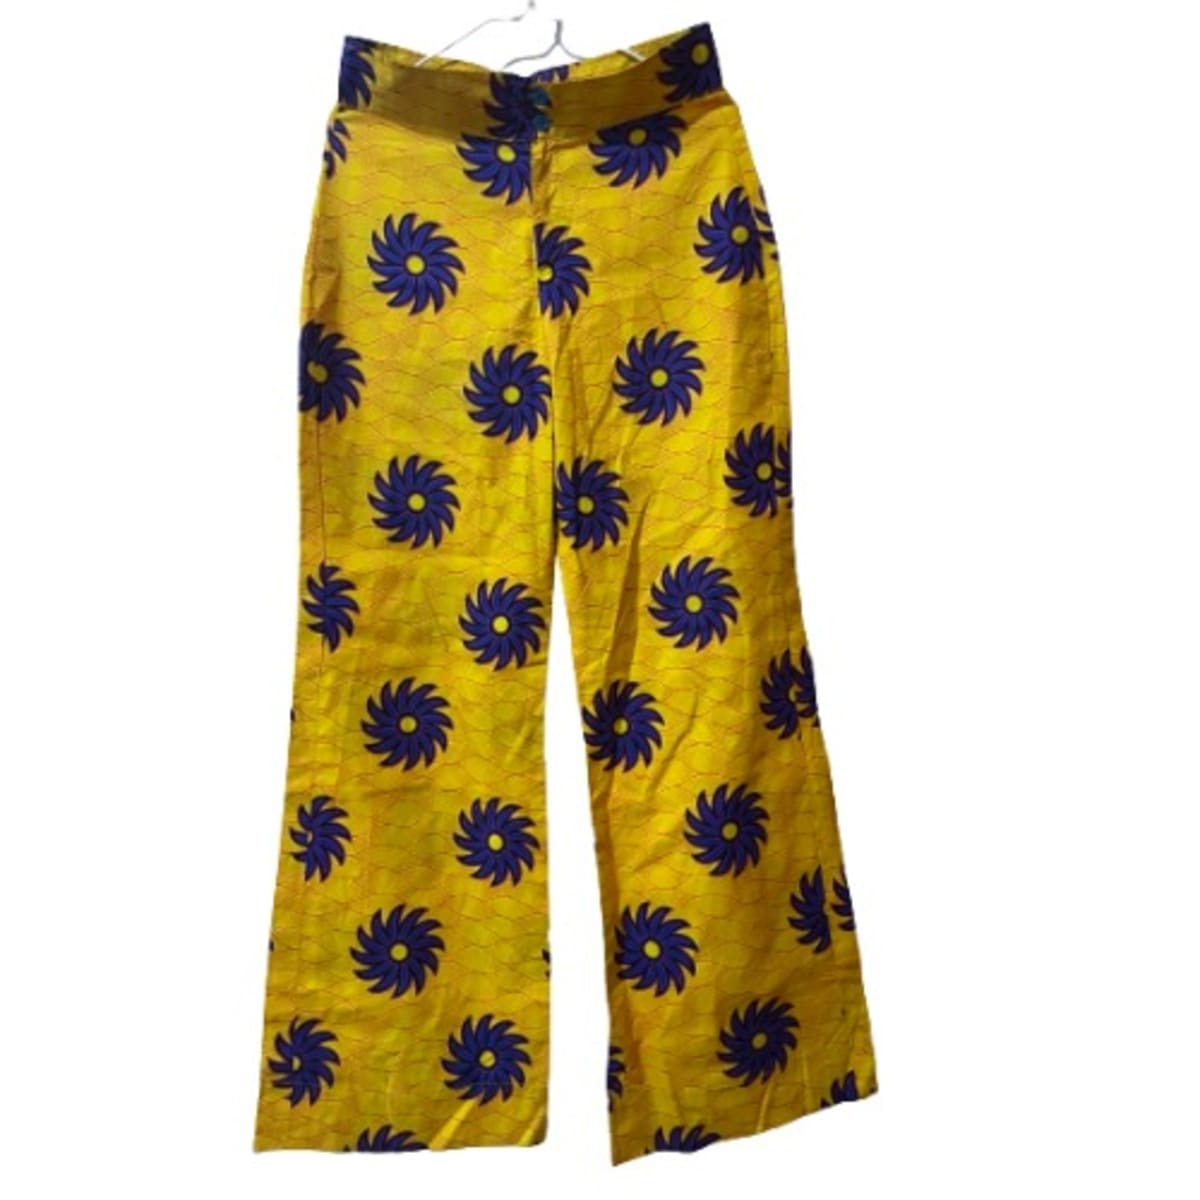 Shoppers Love the SySea Palazzo Pants From Amazon